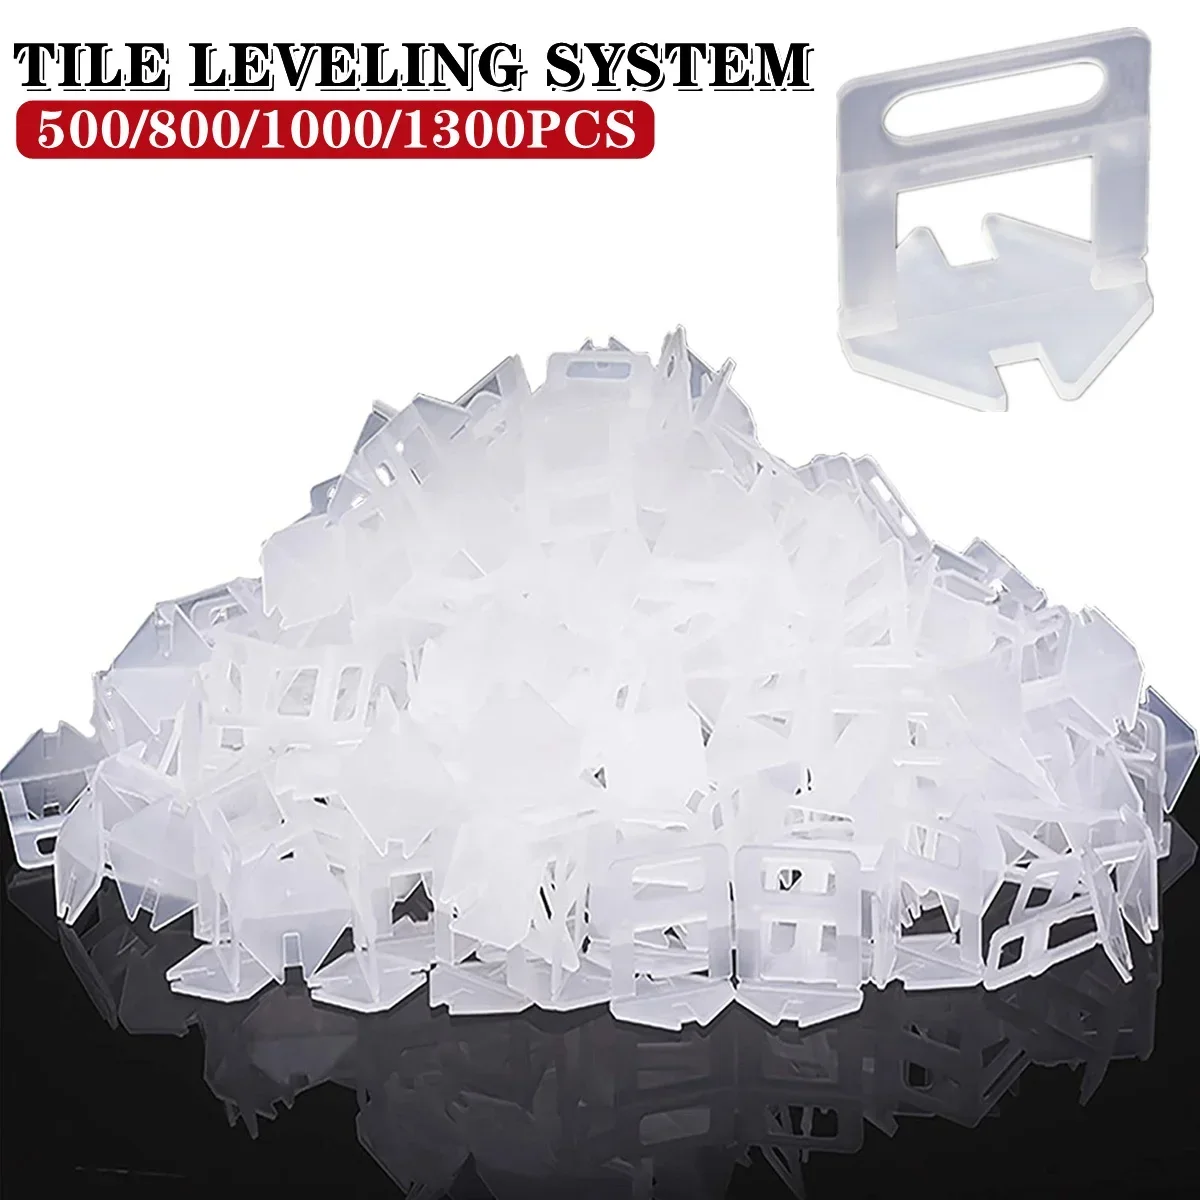 Tile Leveling System Clips 500-1300Pcs Tile Spacers 1MM-3MM for Ceramic Wall Tile Laying Construction Tools  Leveler Spacers tile leveling system 10pcs tile leveler height adjuster locator tiling tools high quality ceramic tile support